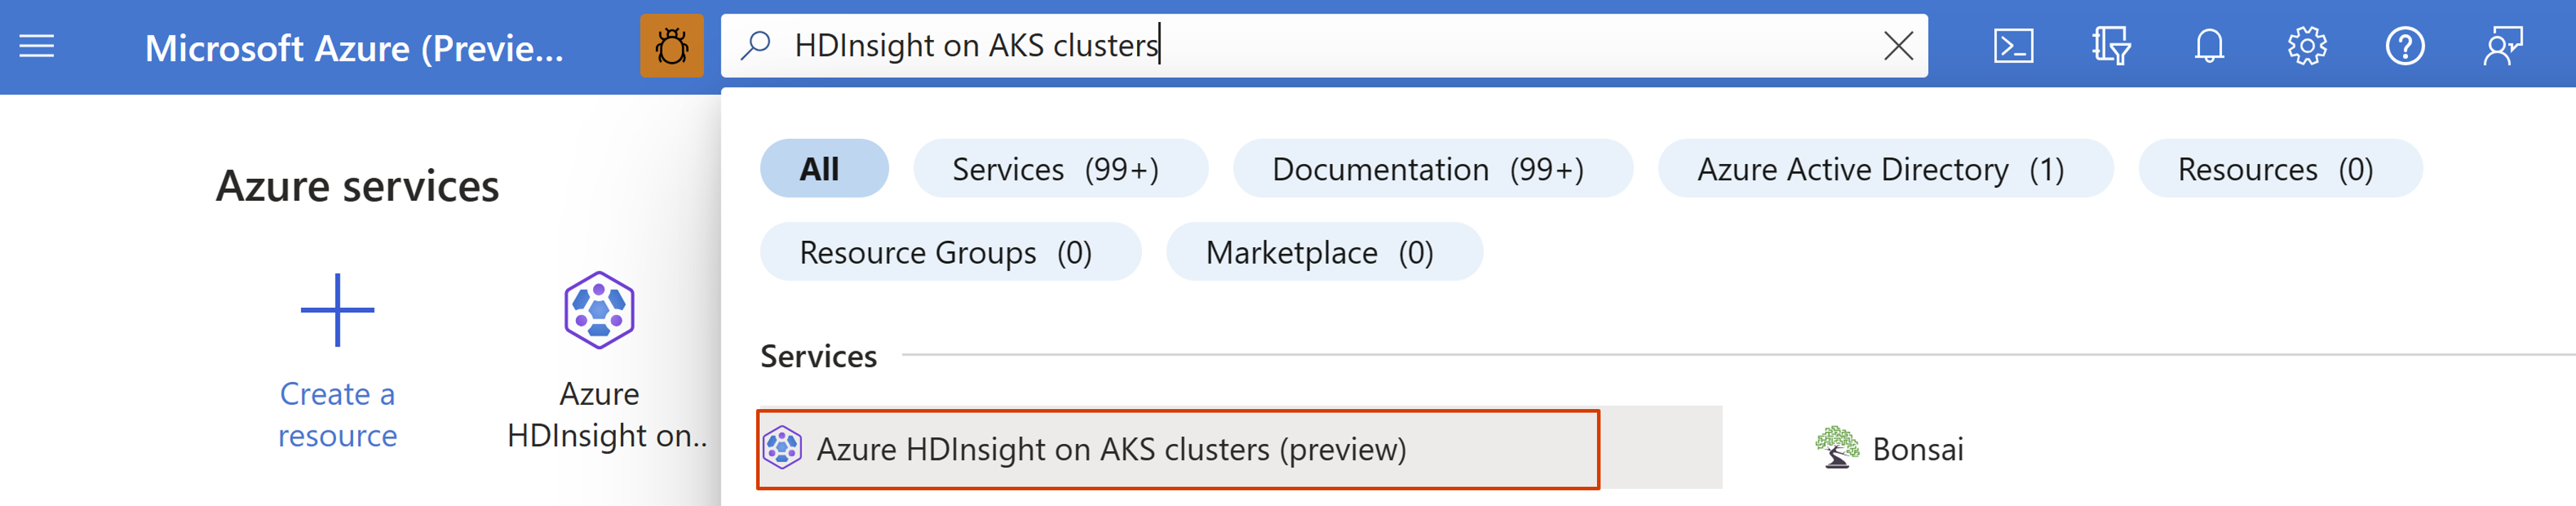 Screenshot showing search option for getting started with HDInsight on AKS Cluster.